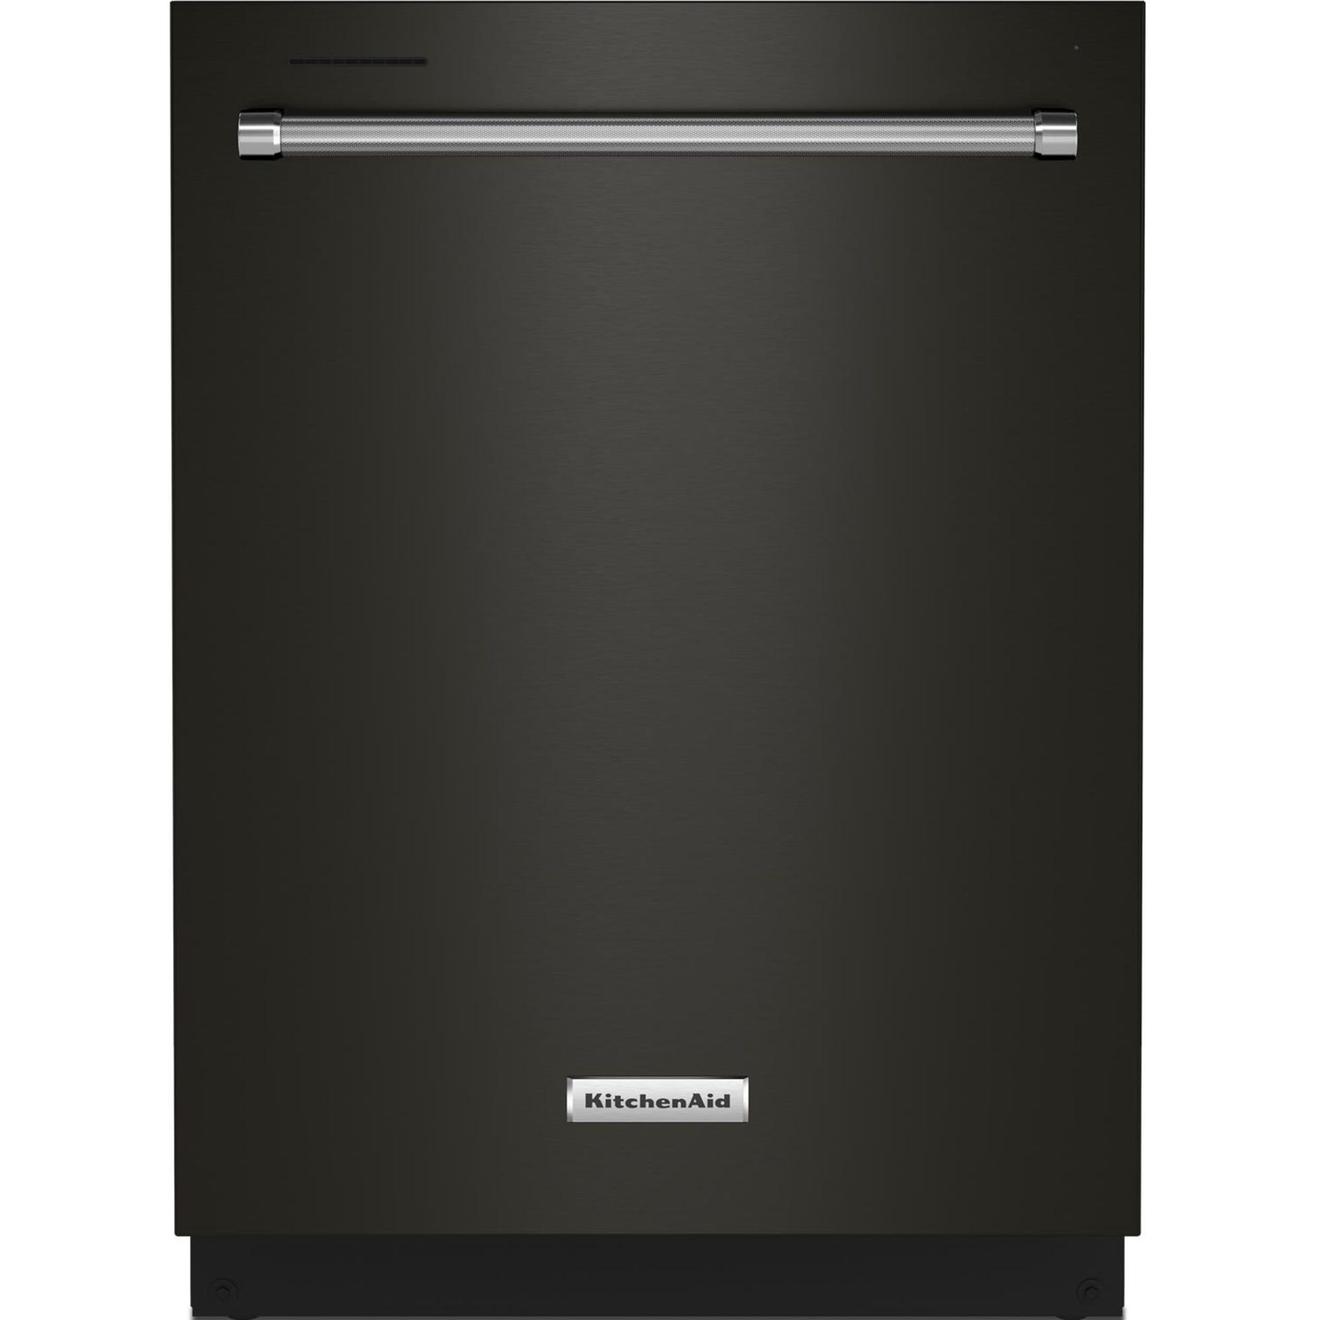 KitchenAid 5 Cycle Dishwasher with Hidden Controls offers at $1099.98 in Trail Appliances